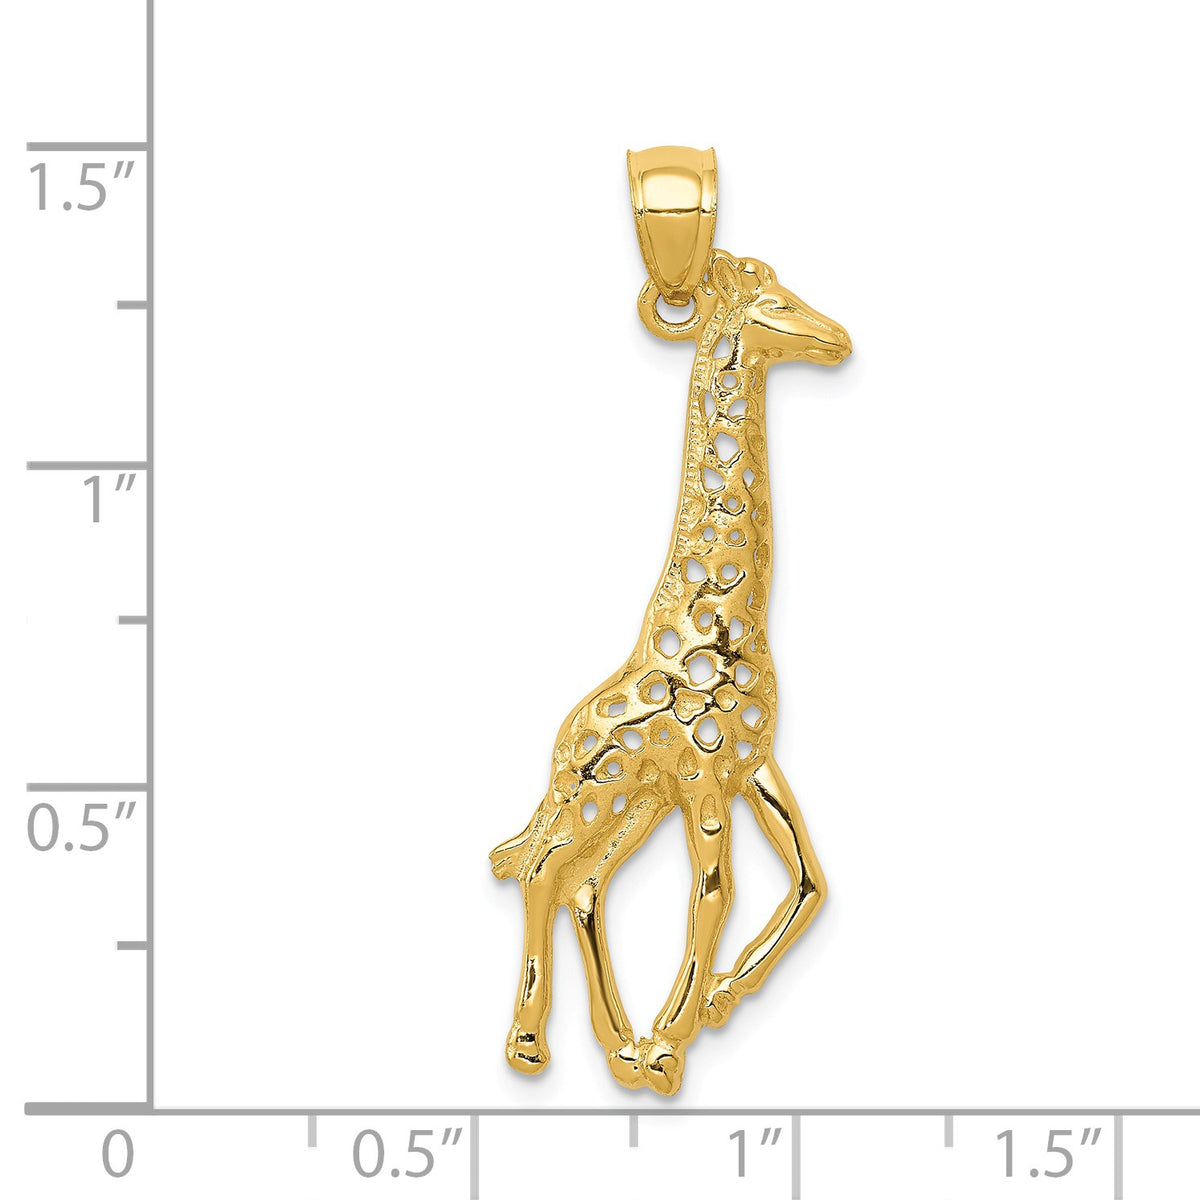 Alternate view of the 14k Yellow Gold 2D Polished Giraffe Pendant by The Black Bow Jewelry Co.